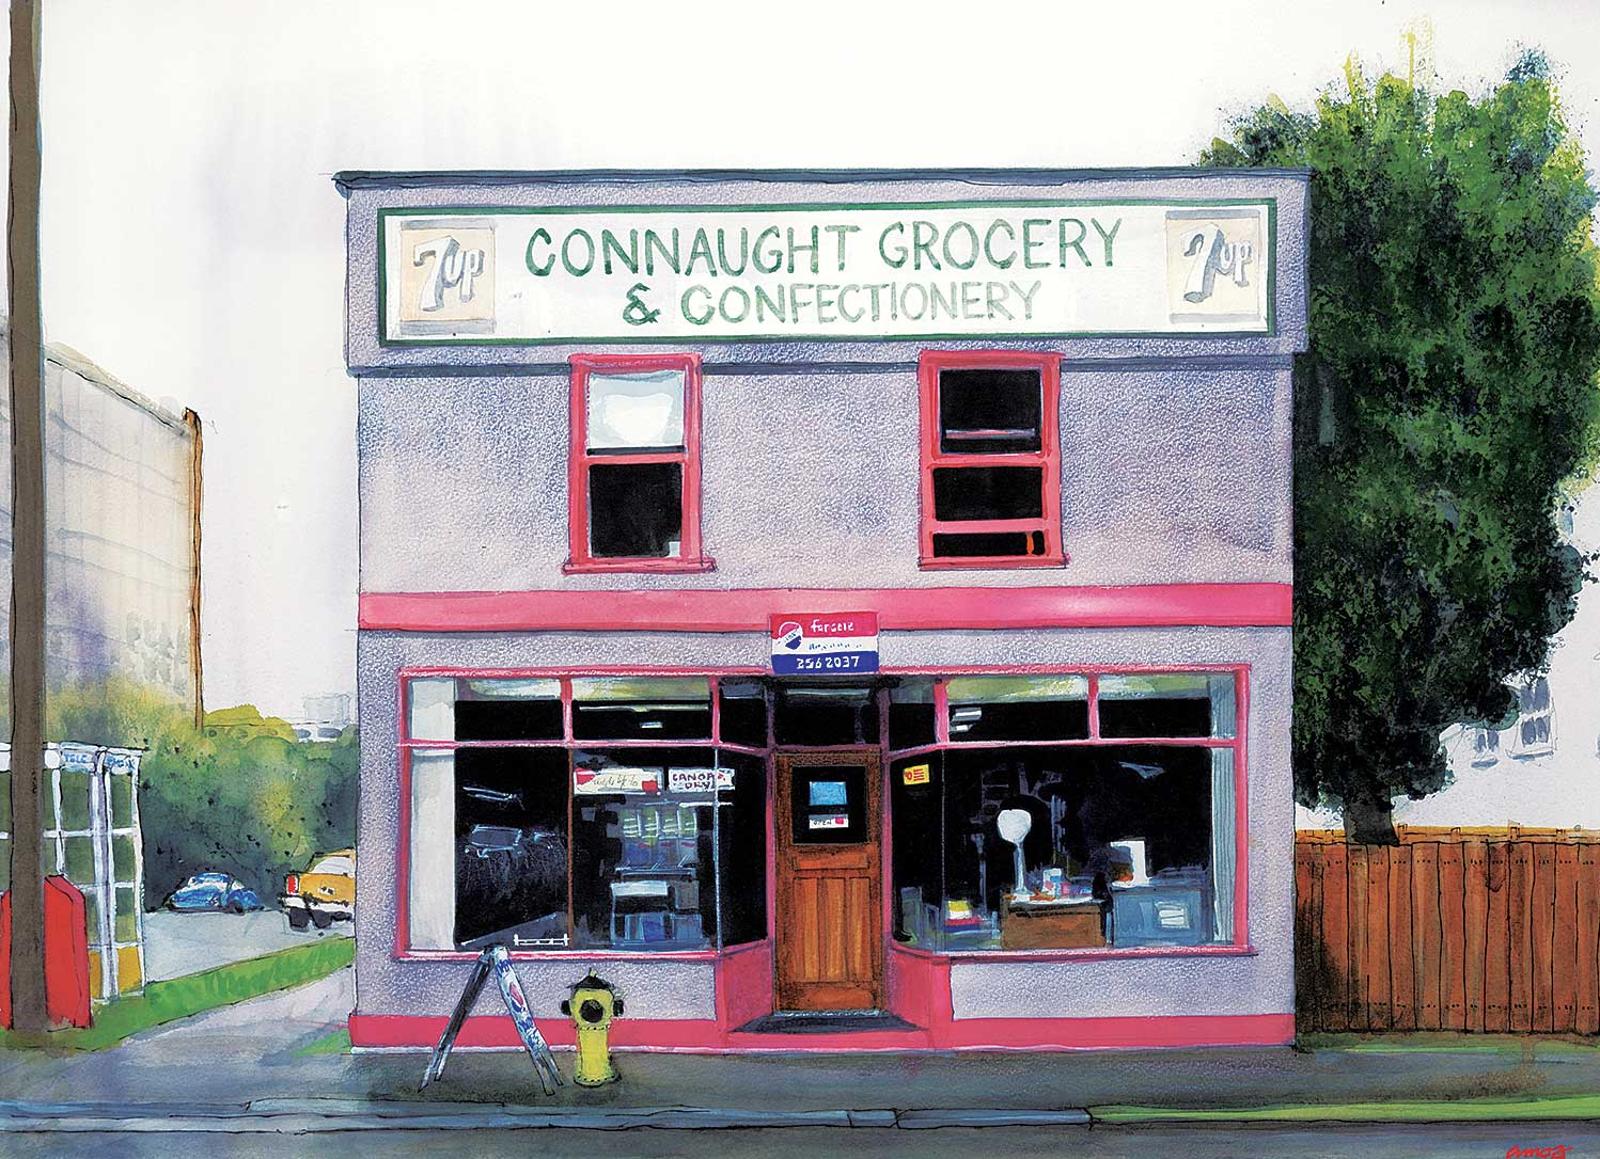 Robert Edward Wood (1919-1980) - Connaught Grocery